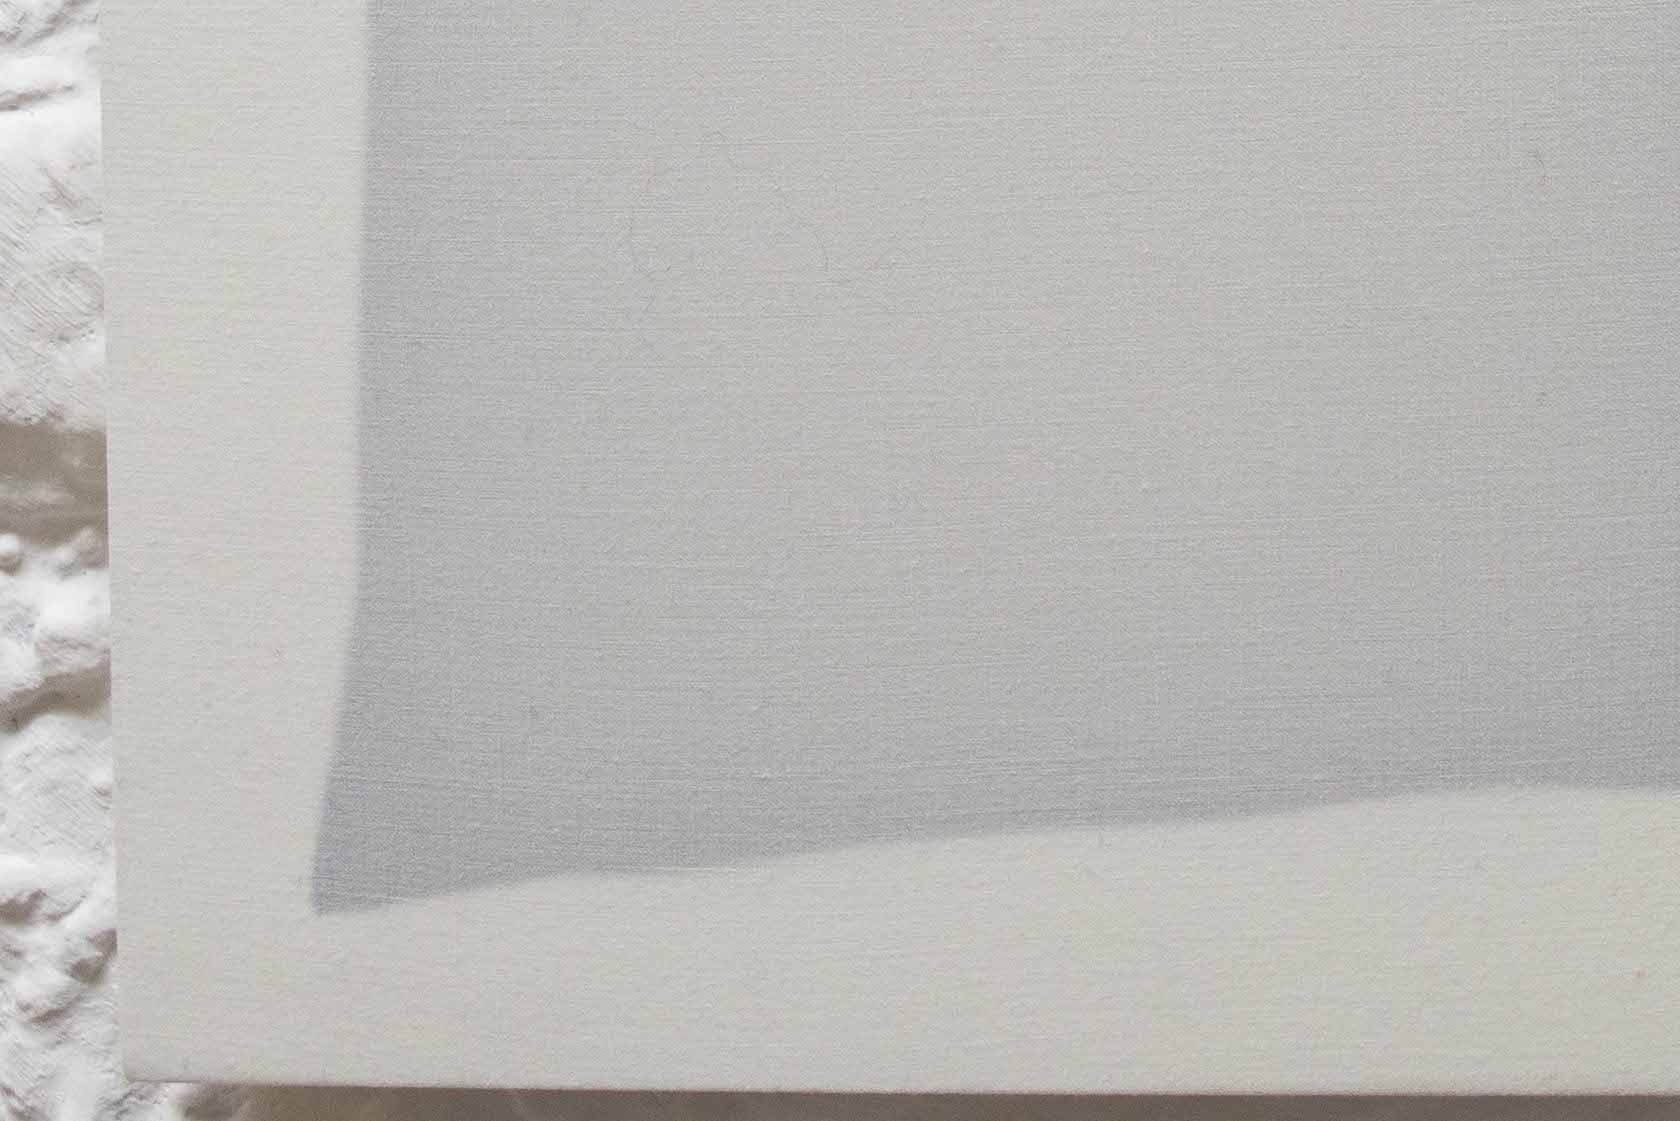 Light gray rectangle on a white background